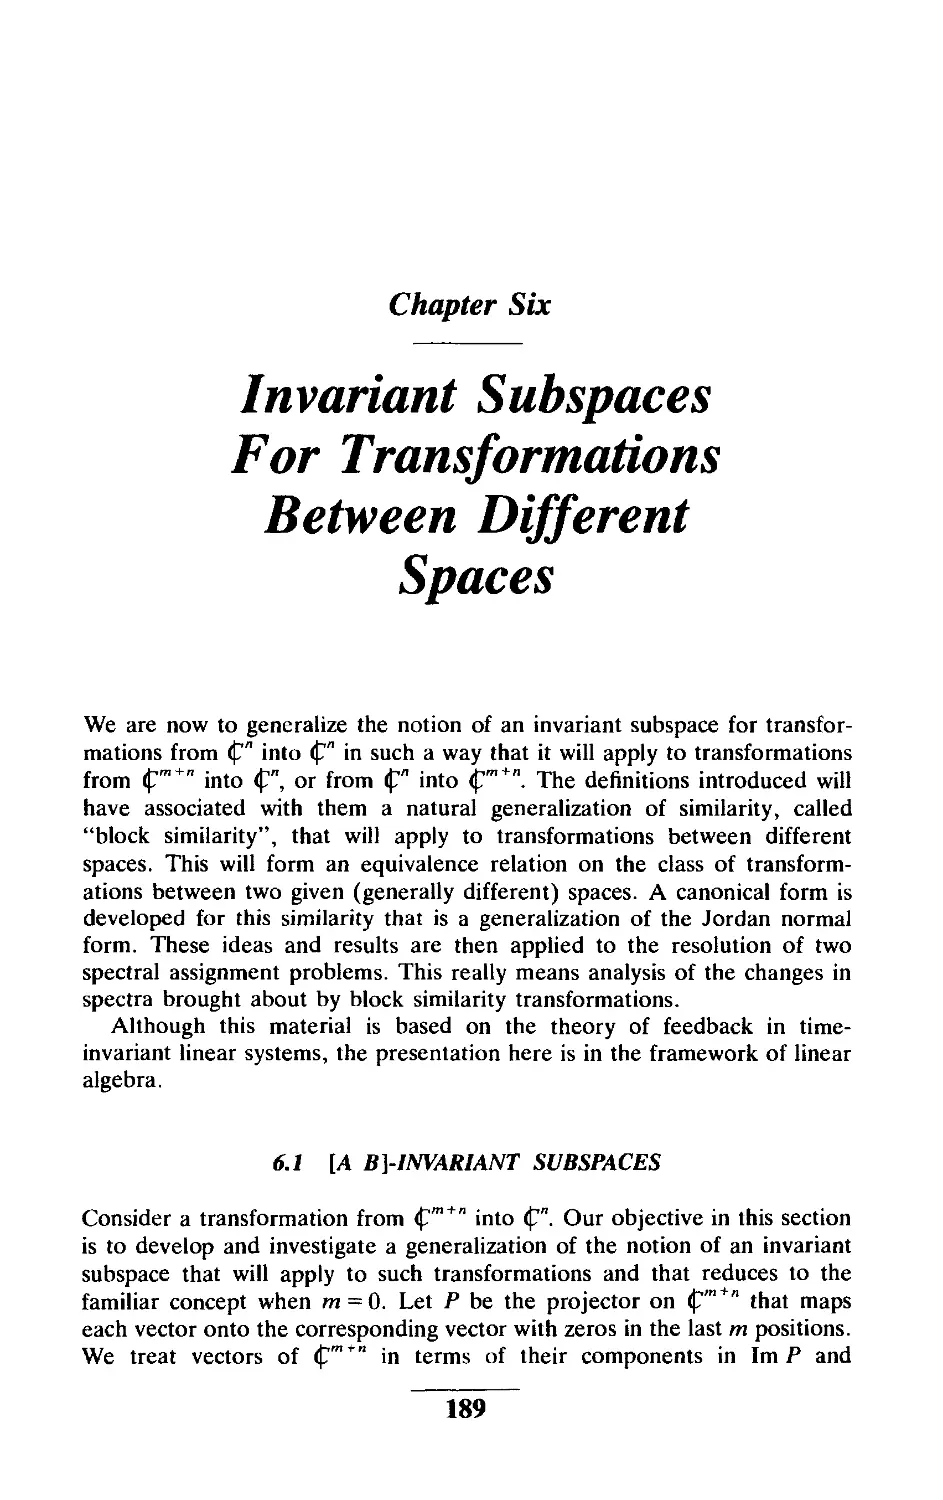 Chapter Six Invariant Subspaces For Transformations Between Different Spaces